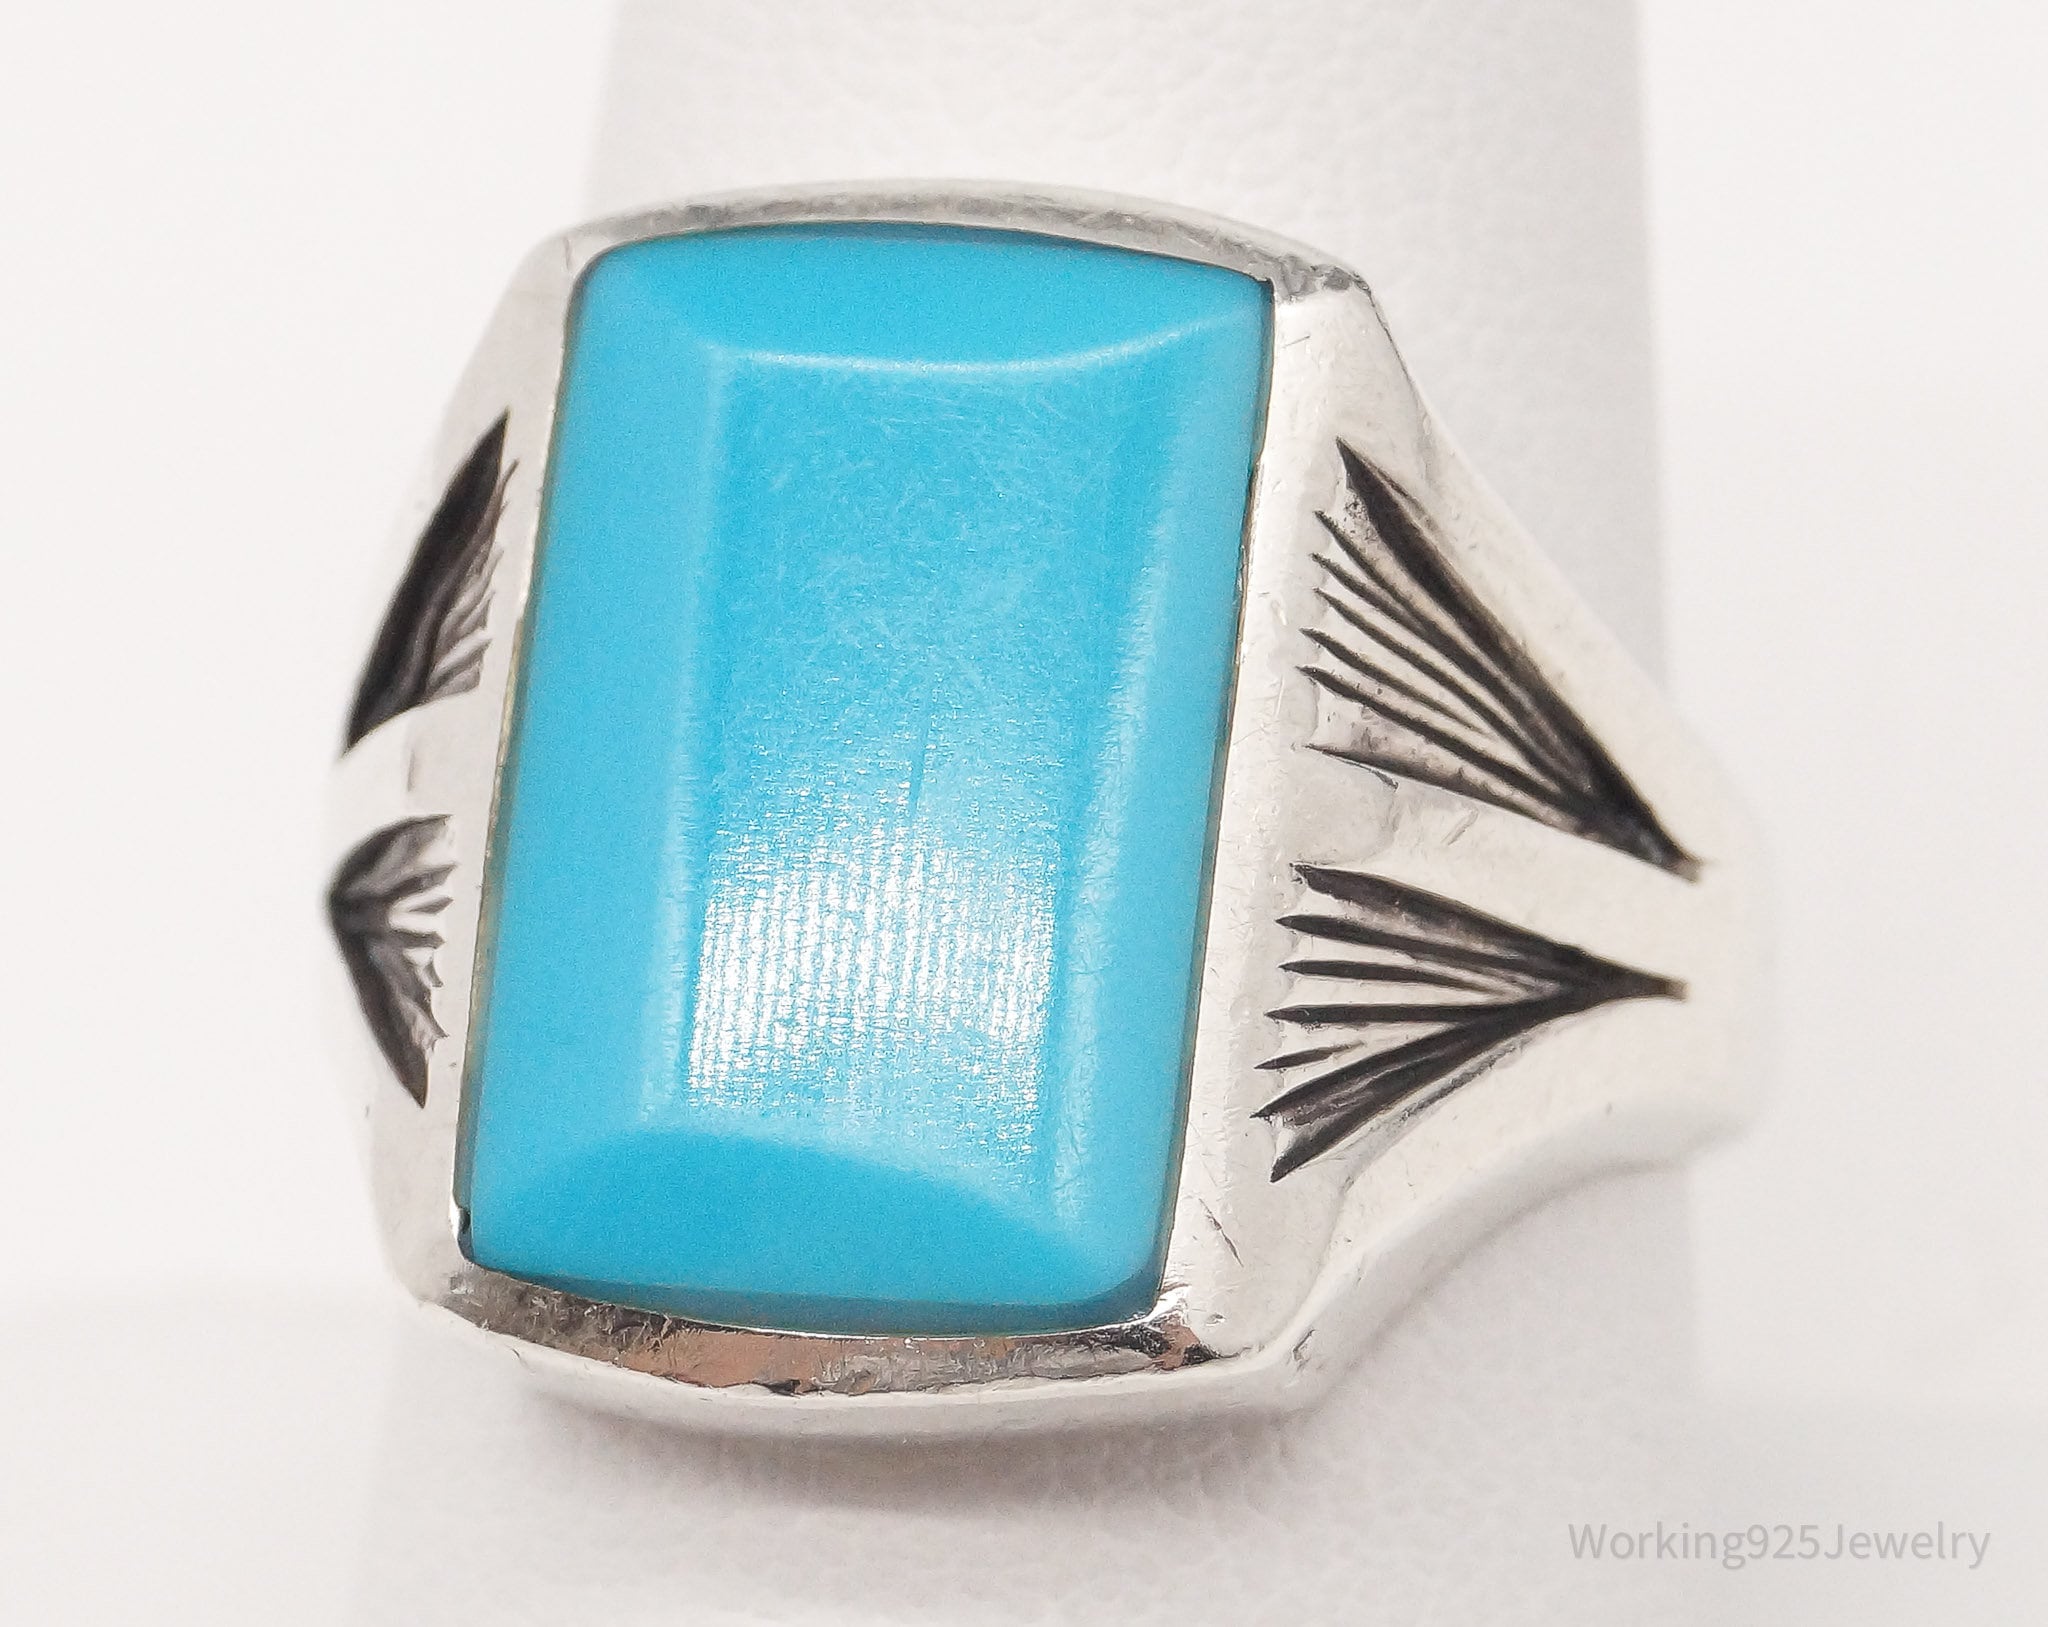 Vintage Native American Blue Turquoise Sterling Silver Ring - Size 8.5